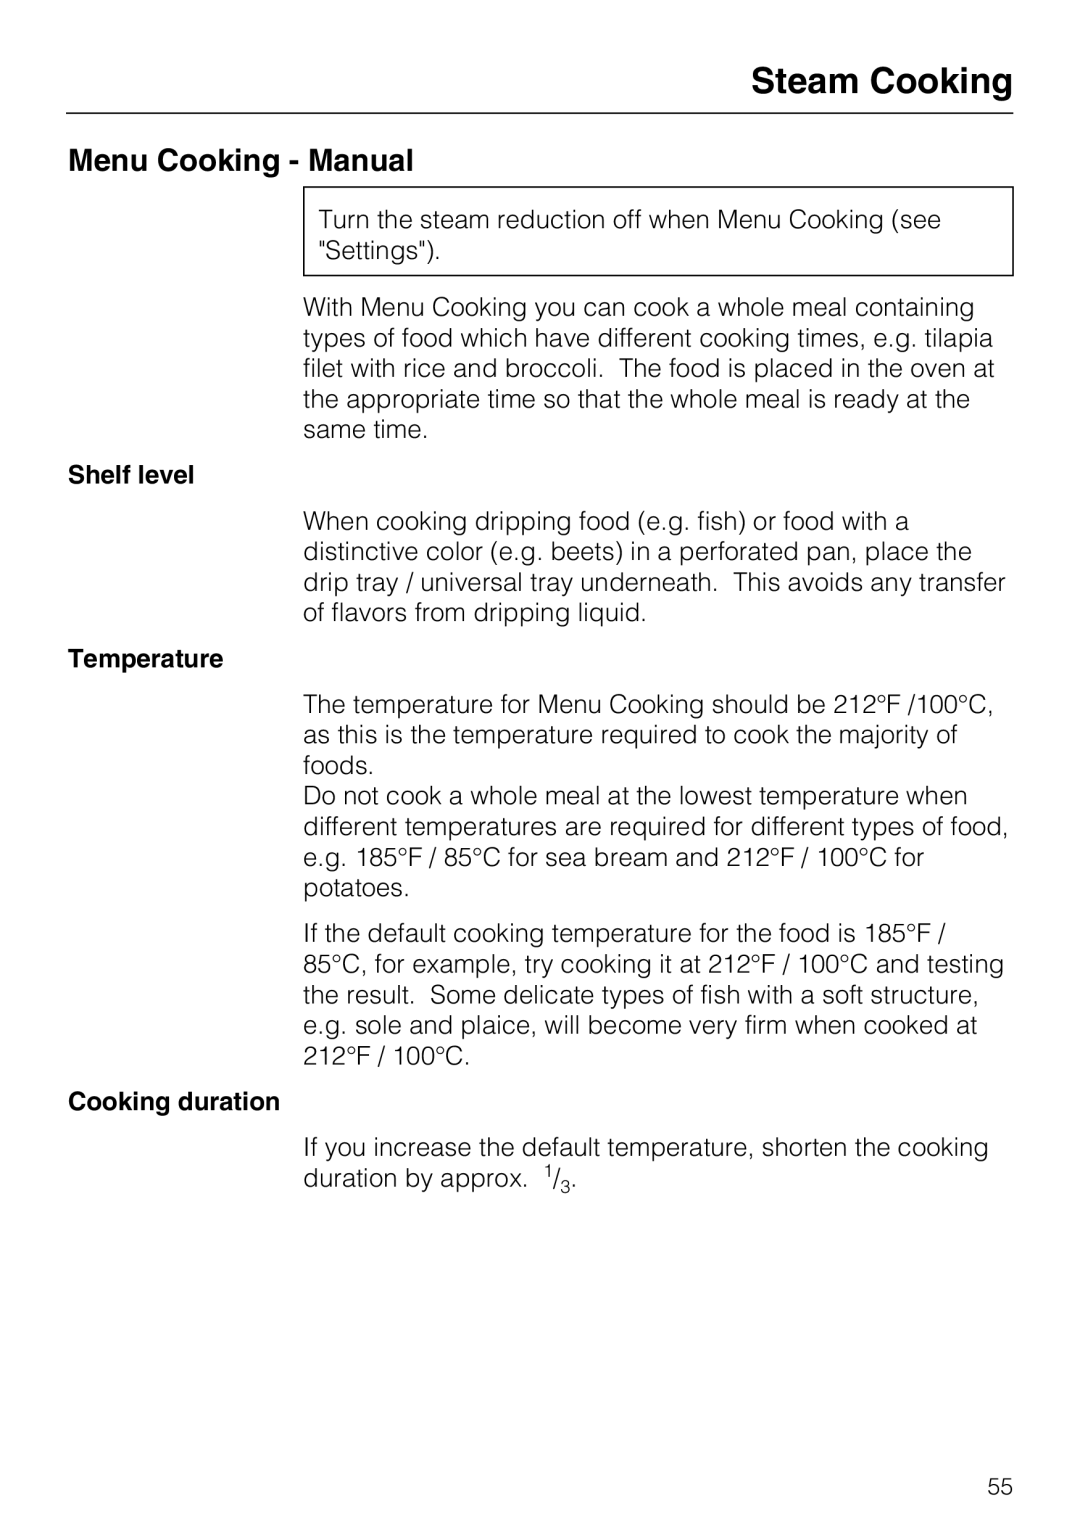 Miele 09 800 830 installation instructions Menu Cooking - Manual, Steam Cooking, Shelf level, Temperature, Cooking duration 